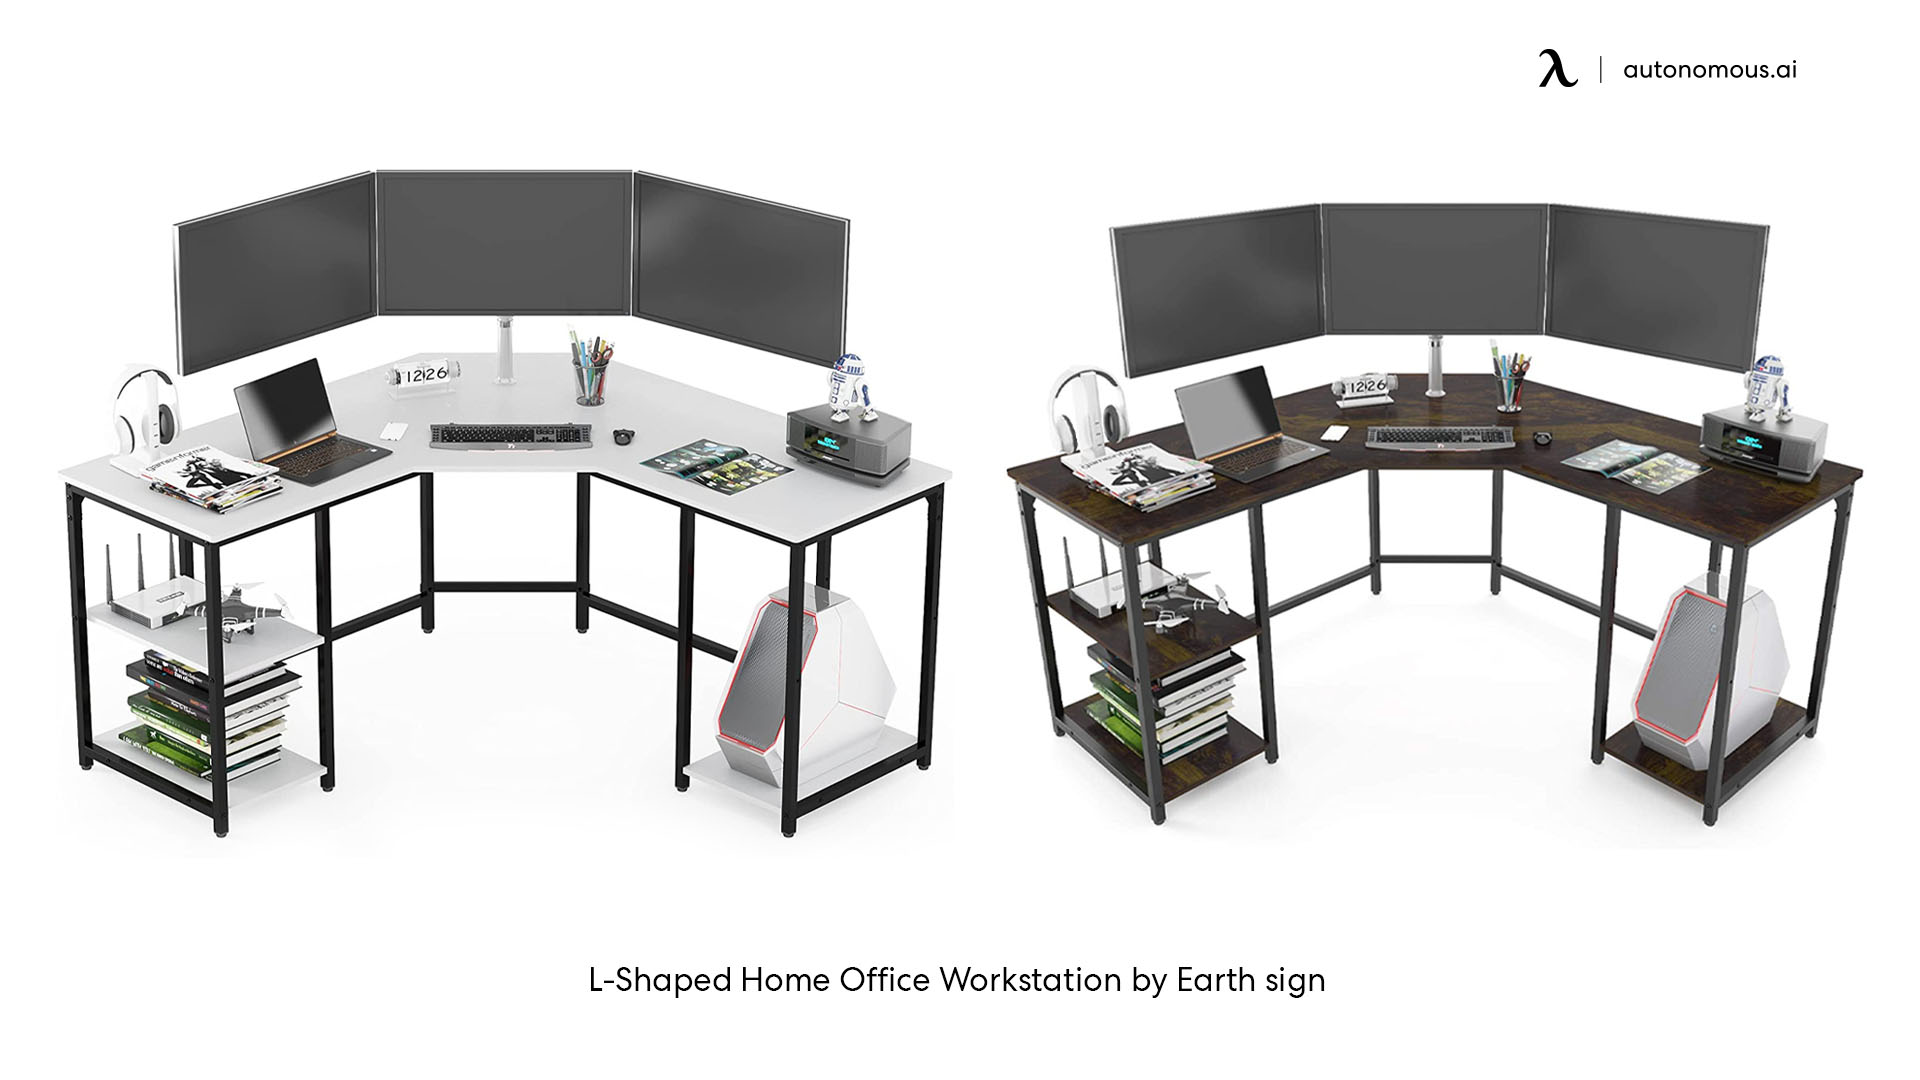 L-Shaped Home Office Workstation by Earth sign